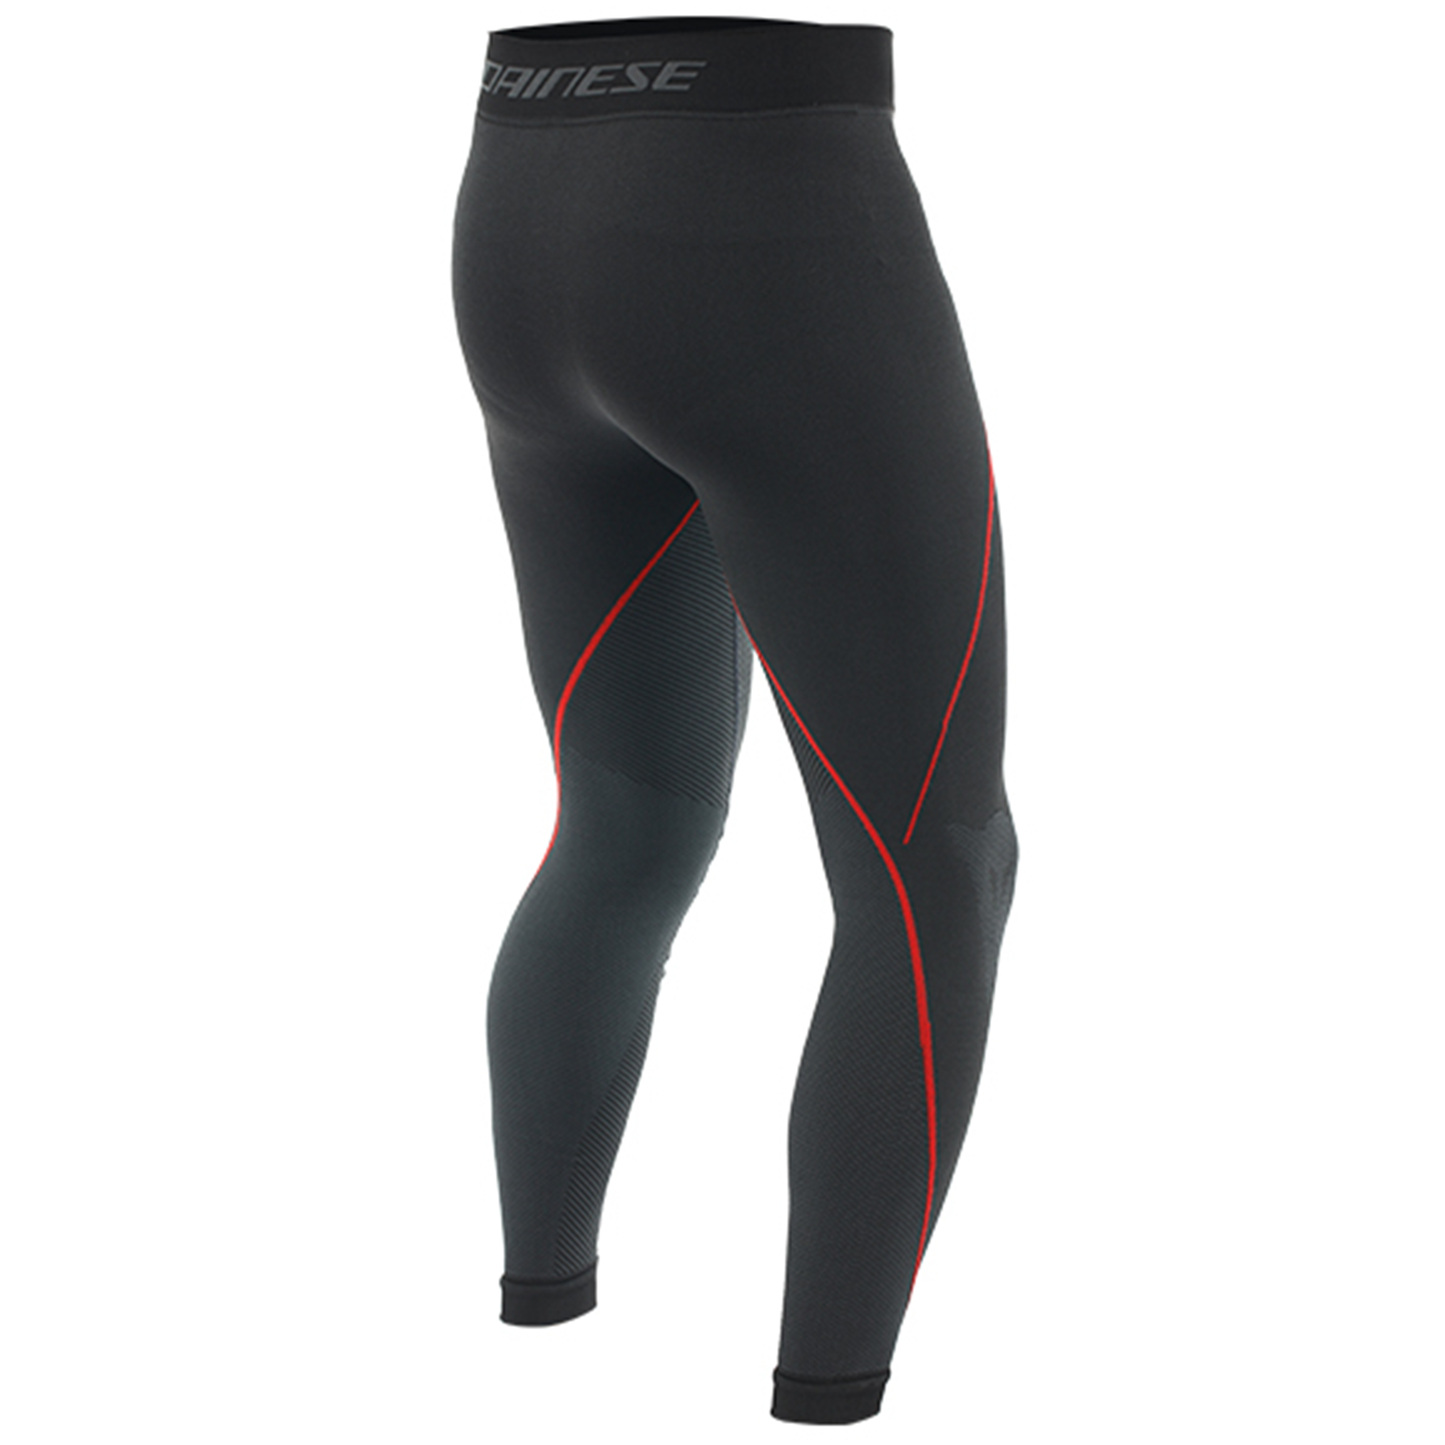 Dainese Thermo Pants - Black/Red (606)